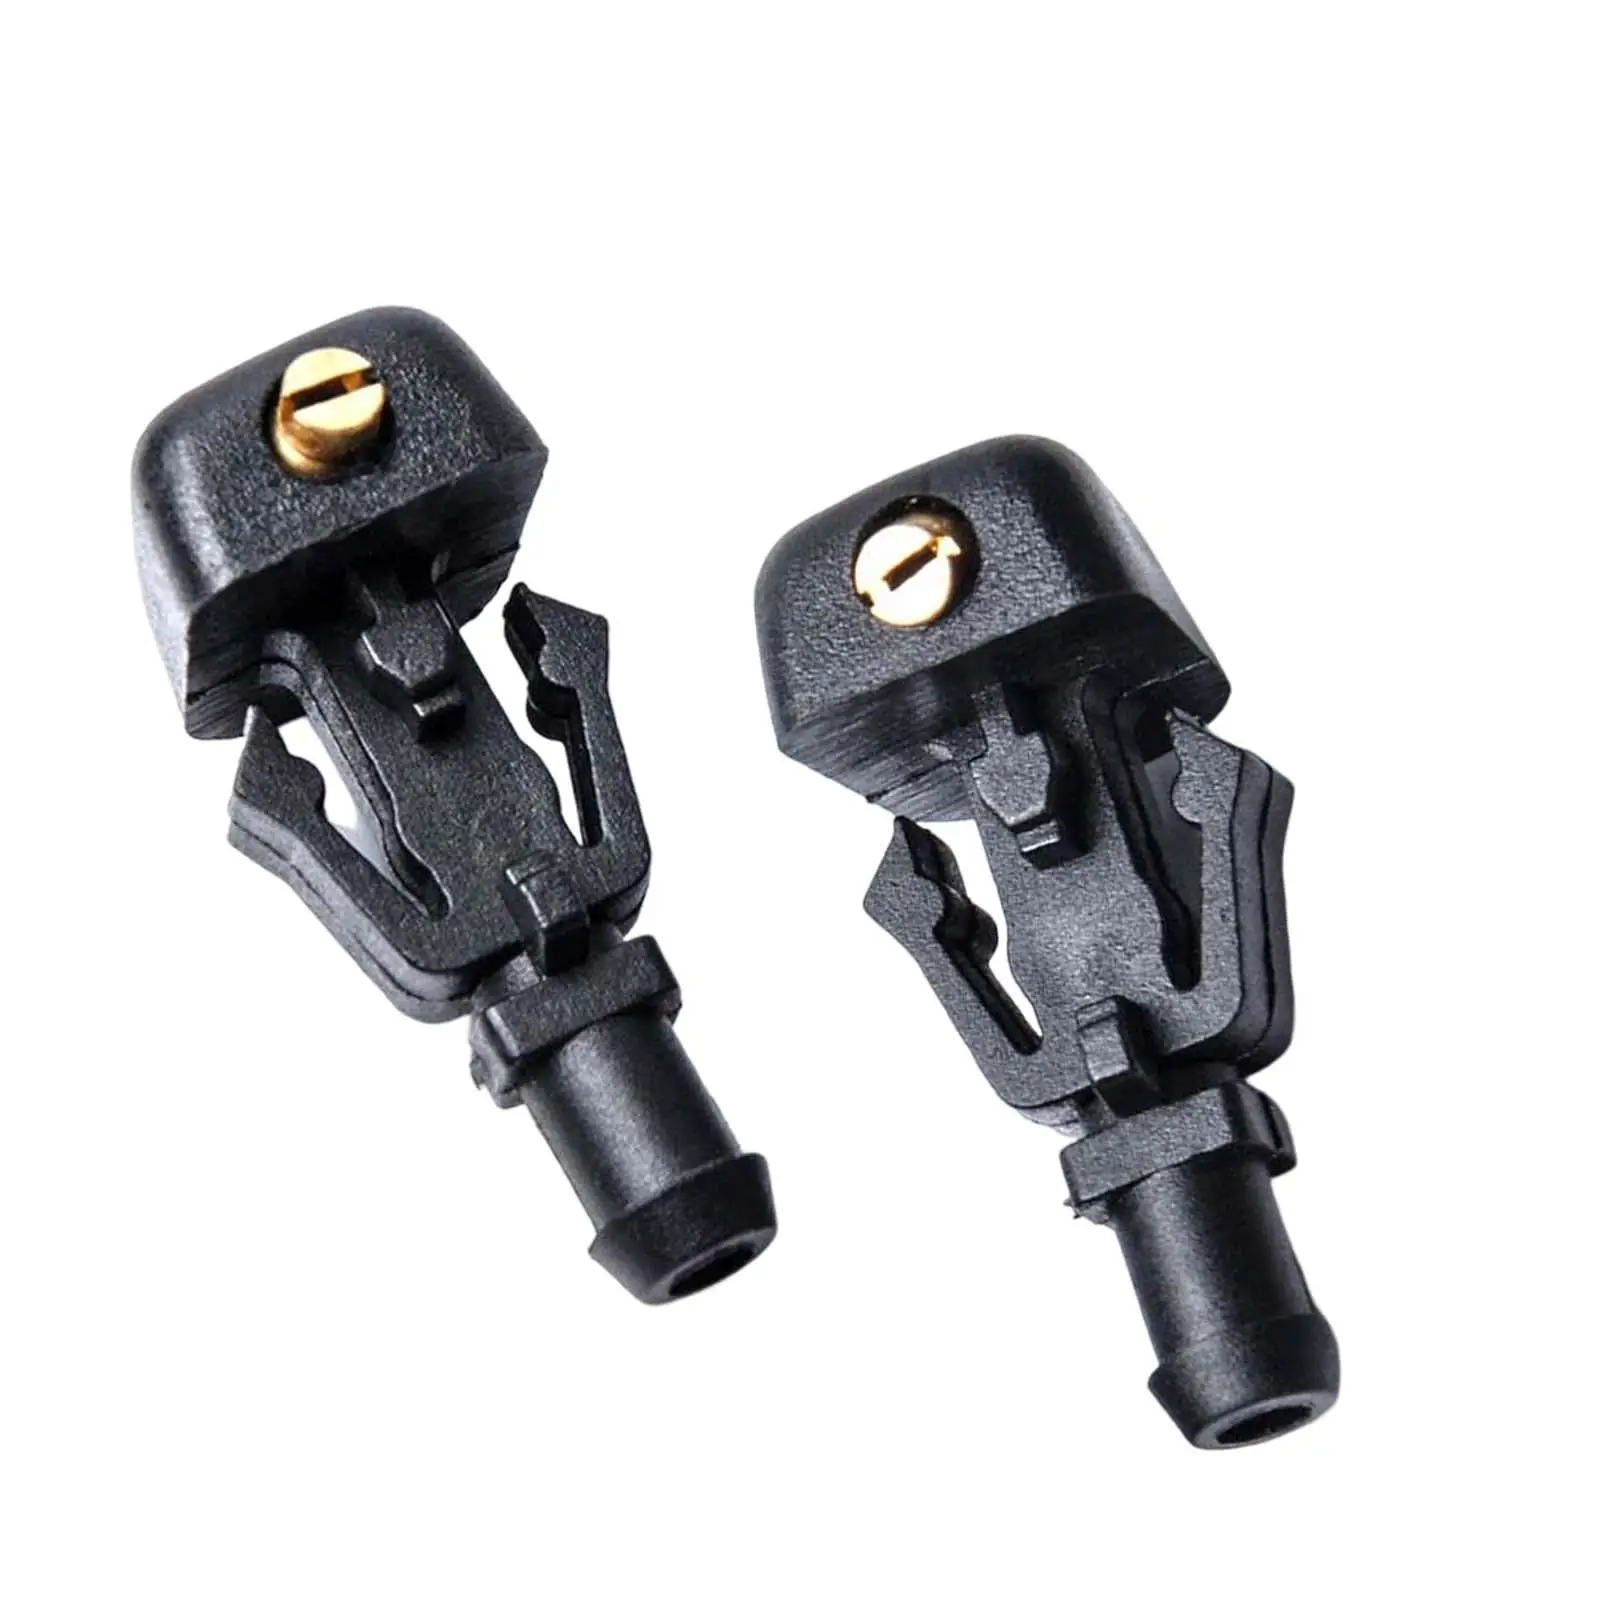 2x Windshield Wiper Washer Spray Jet Nozzle for Mercury Sable 2008-2009